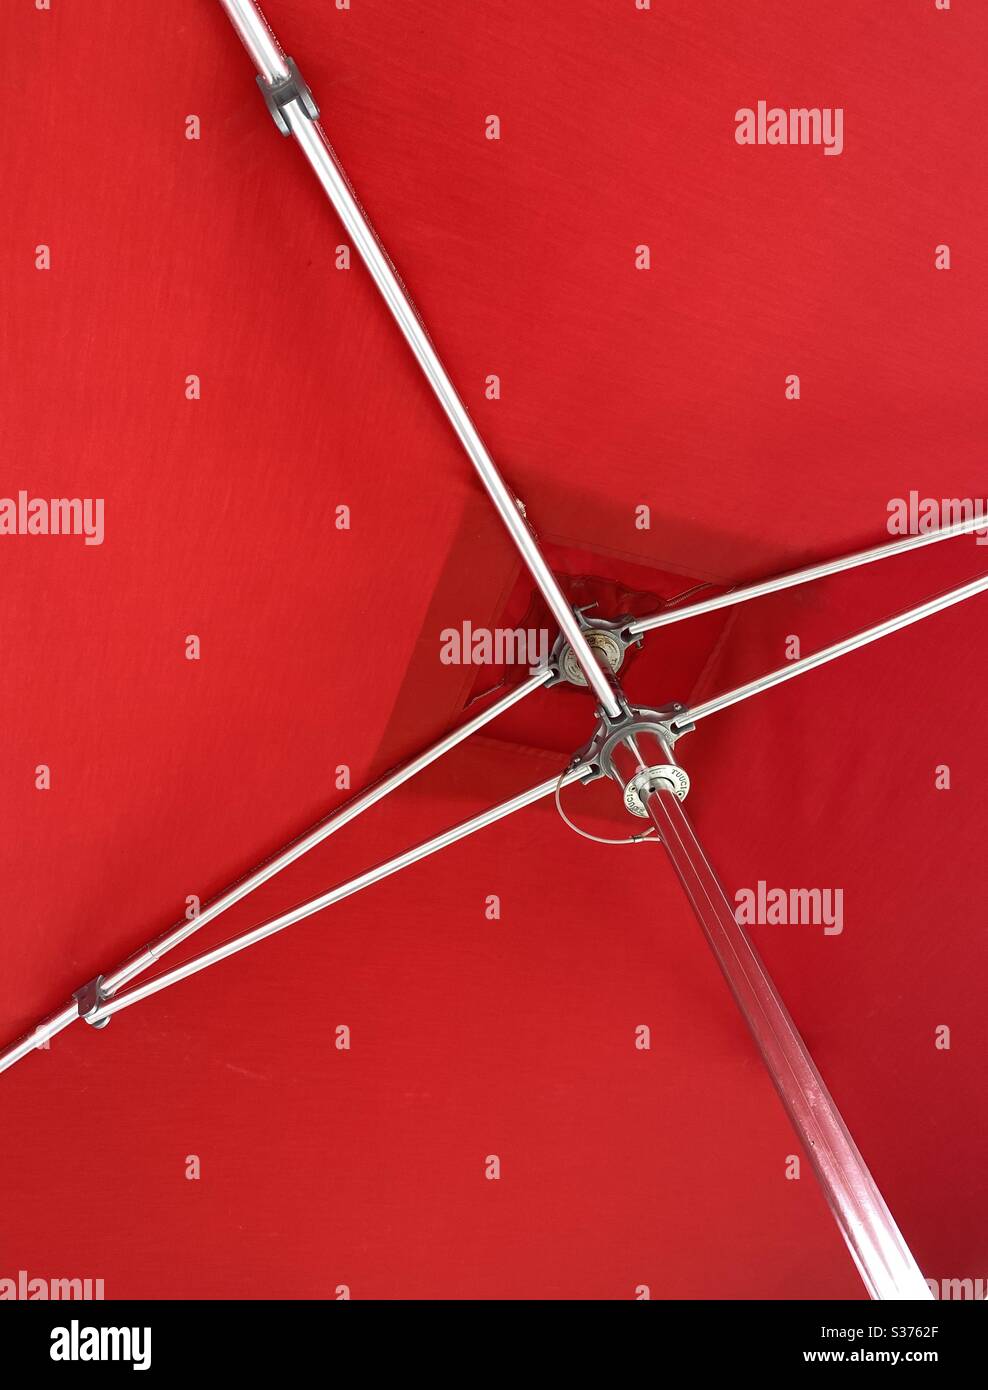 Underside of a bright red outdoor umbrella with silver steel pole Stock Photo